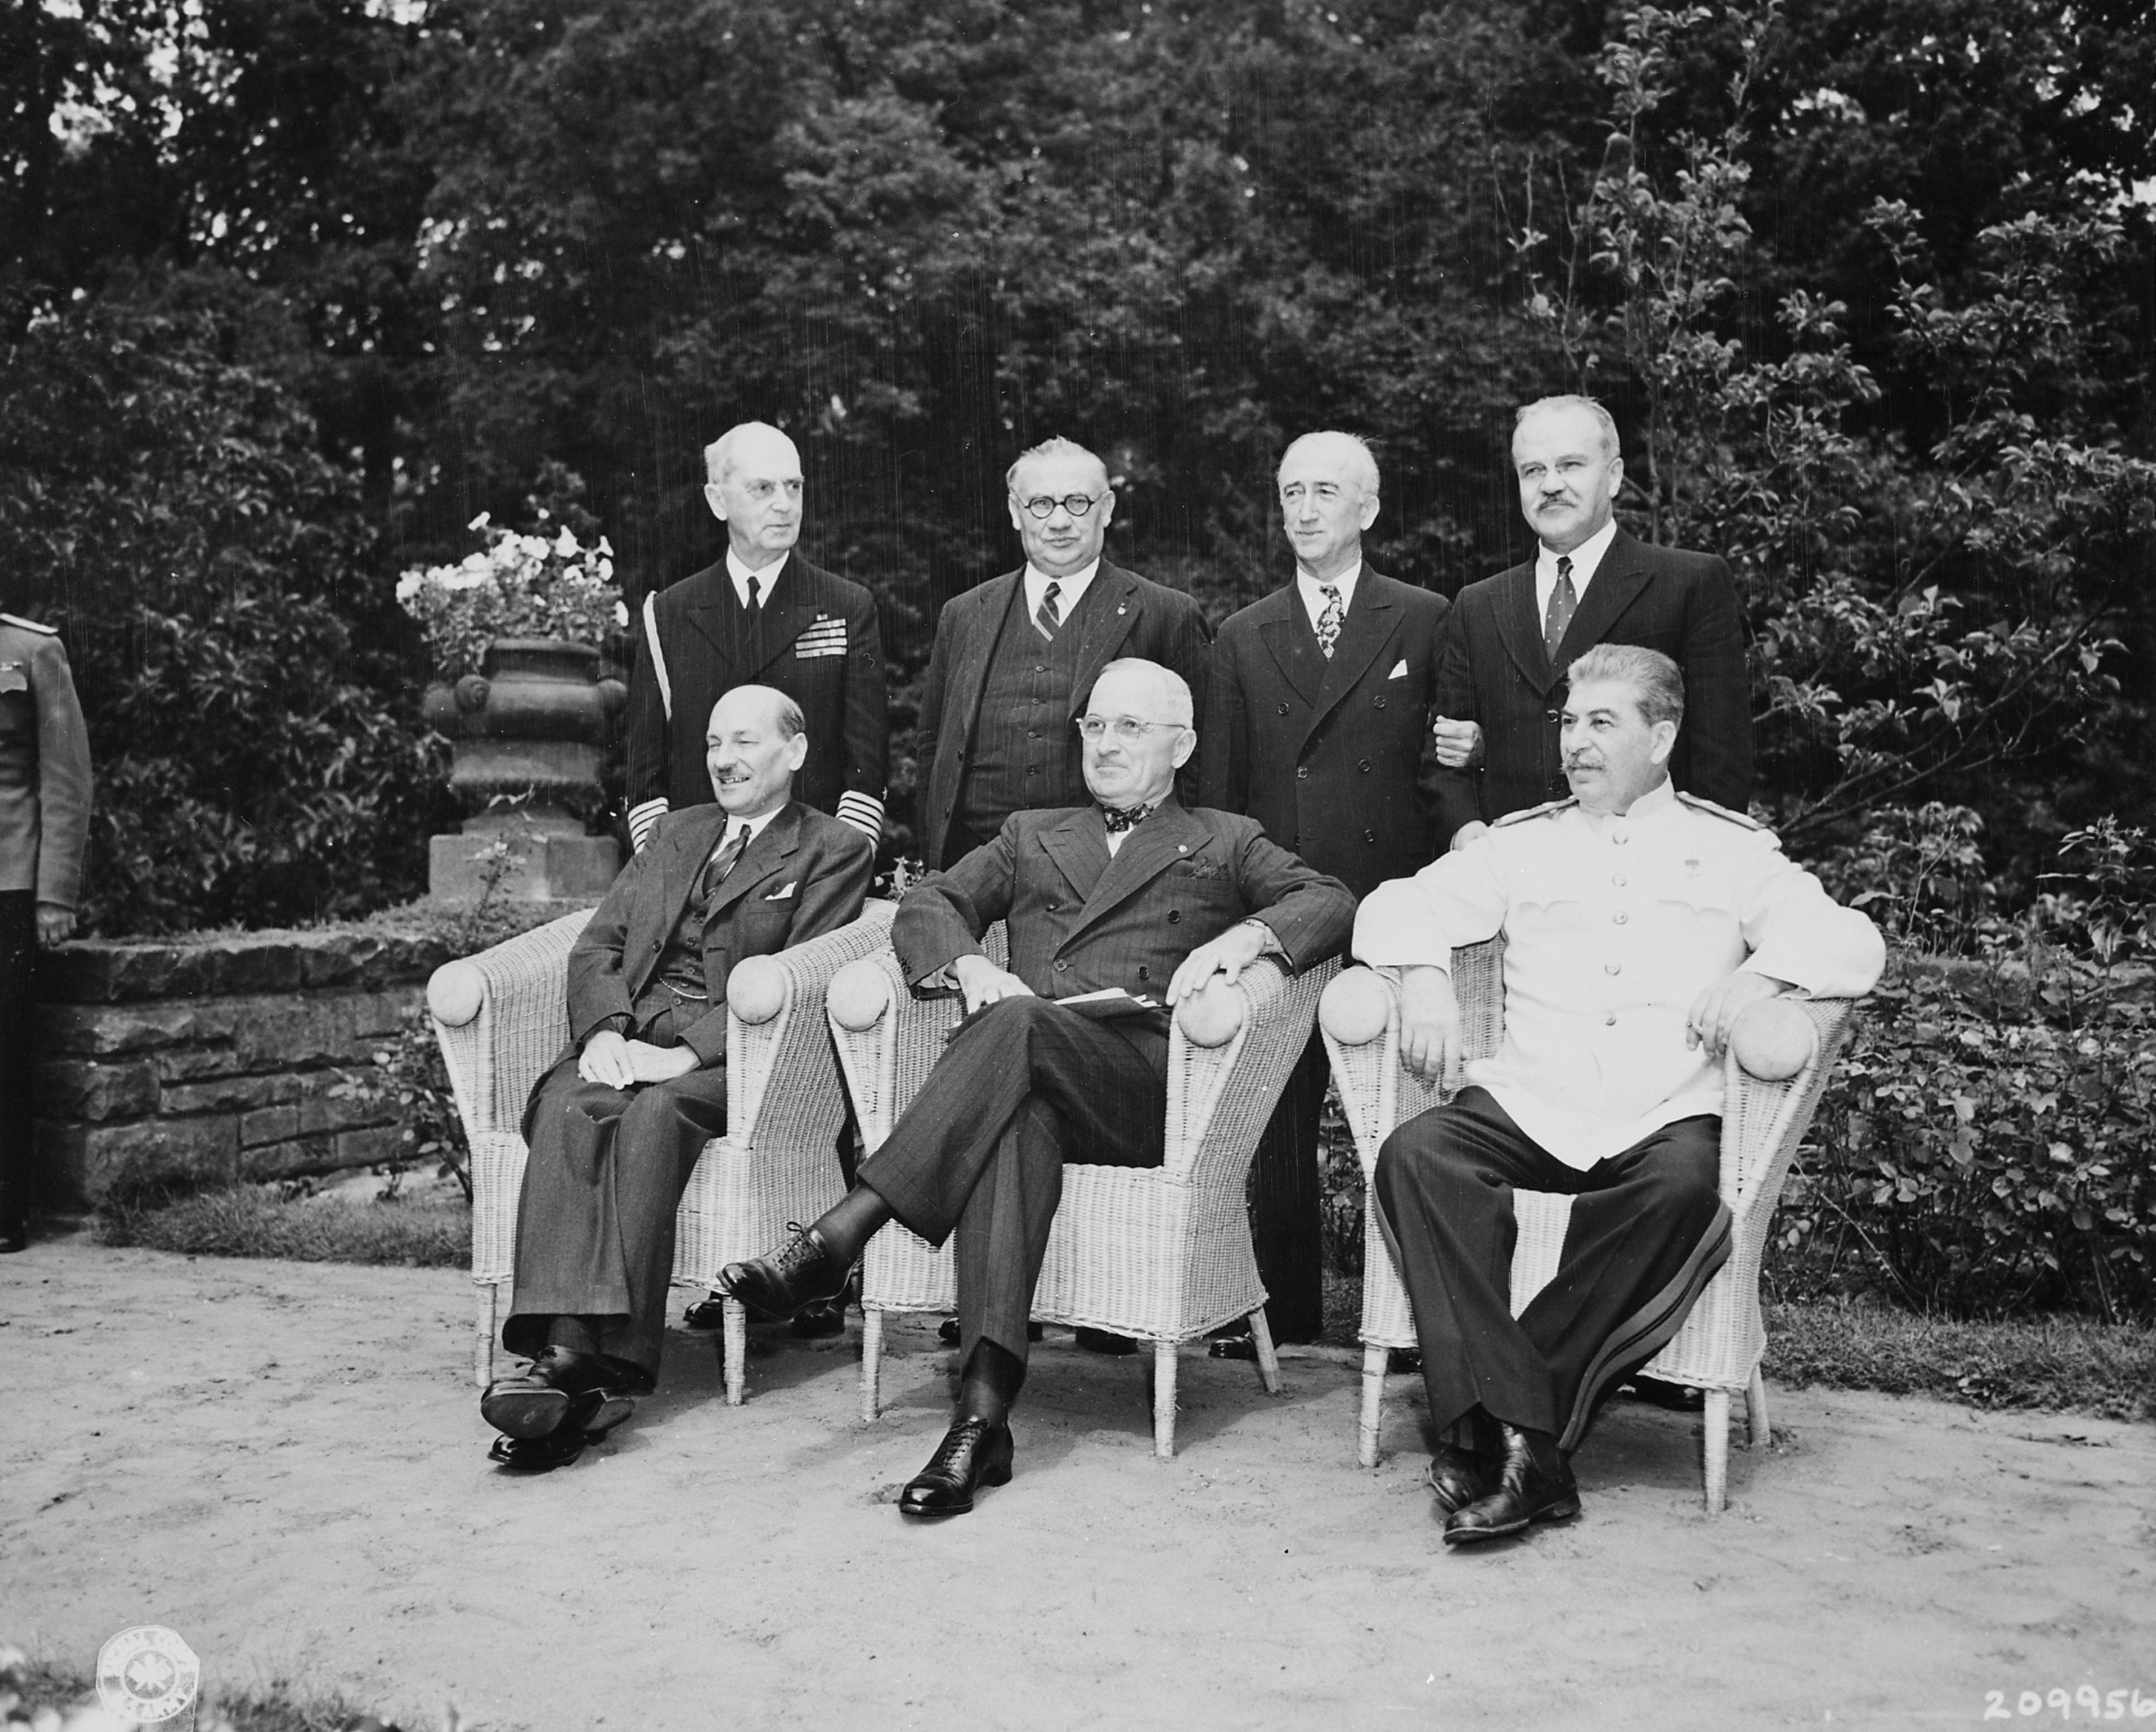 Attlee, Truman, and Stalin at Potsdam Conference, circa 28 Jul to 1 Aug 1945, photo 5 of 5